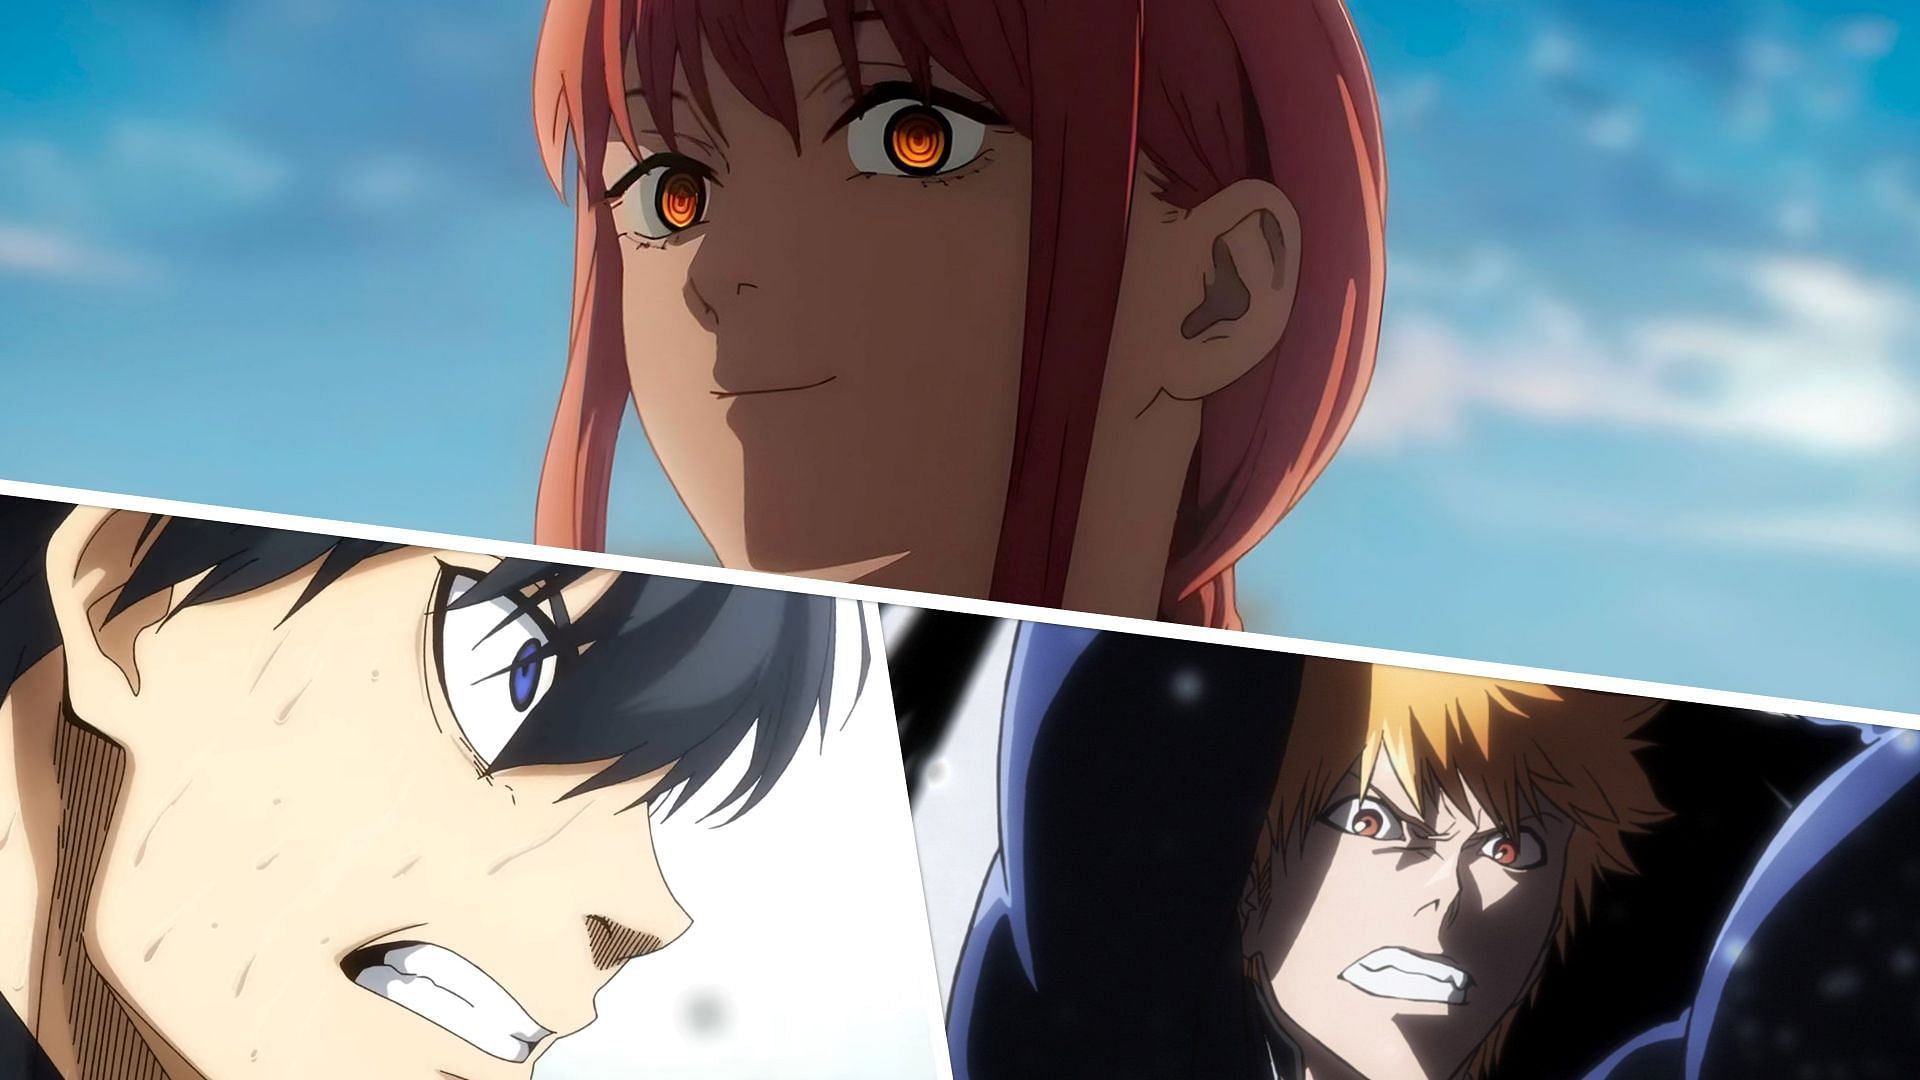 Anime News Roundup - Bleach: TYBW PV released at Aniplex Online Fest 2022,  Chainsaw Man, Blue Lock opening and endings released, and more